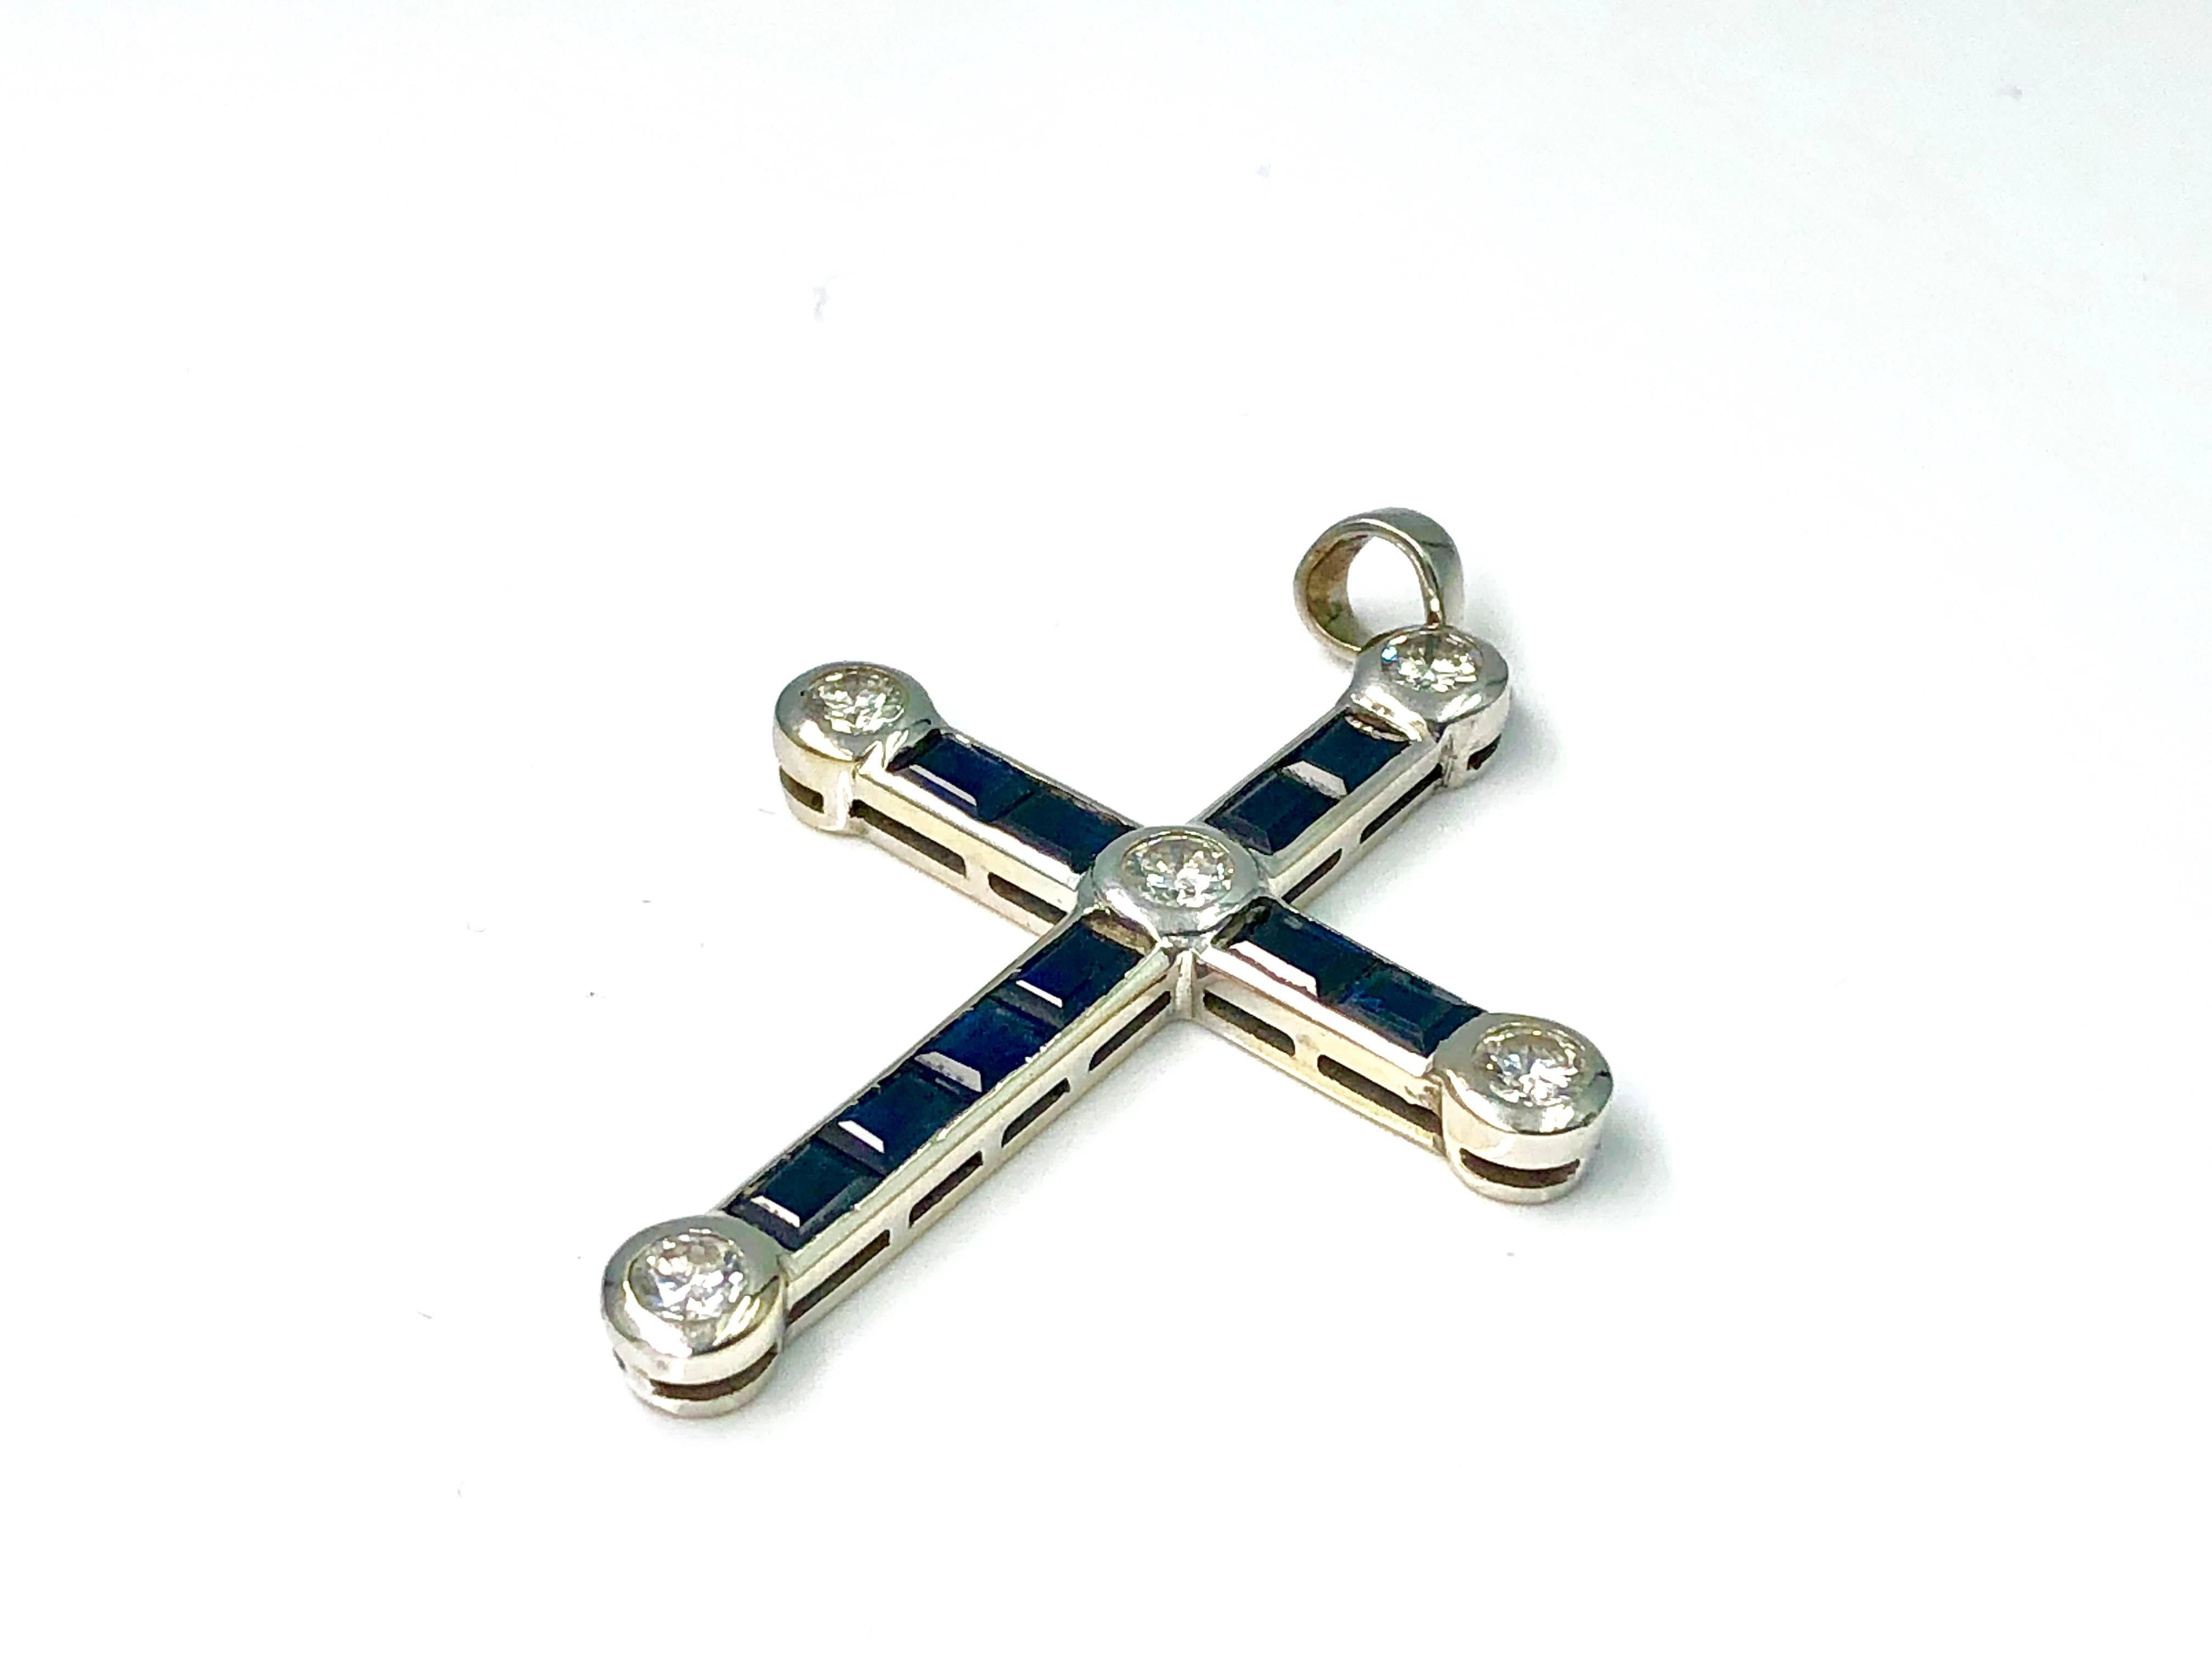 A pendant representing a cross featuring baguette cut sapphires and 5 round diamonds

Natural sapphire (baguette cut), 5 diamonds (1ct ca.)